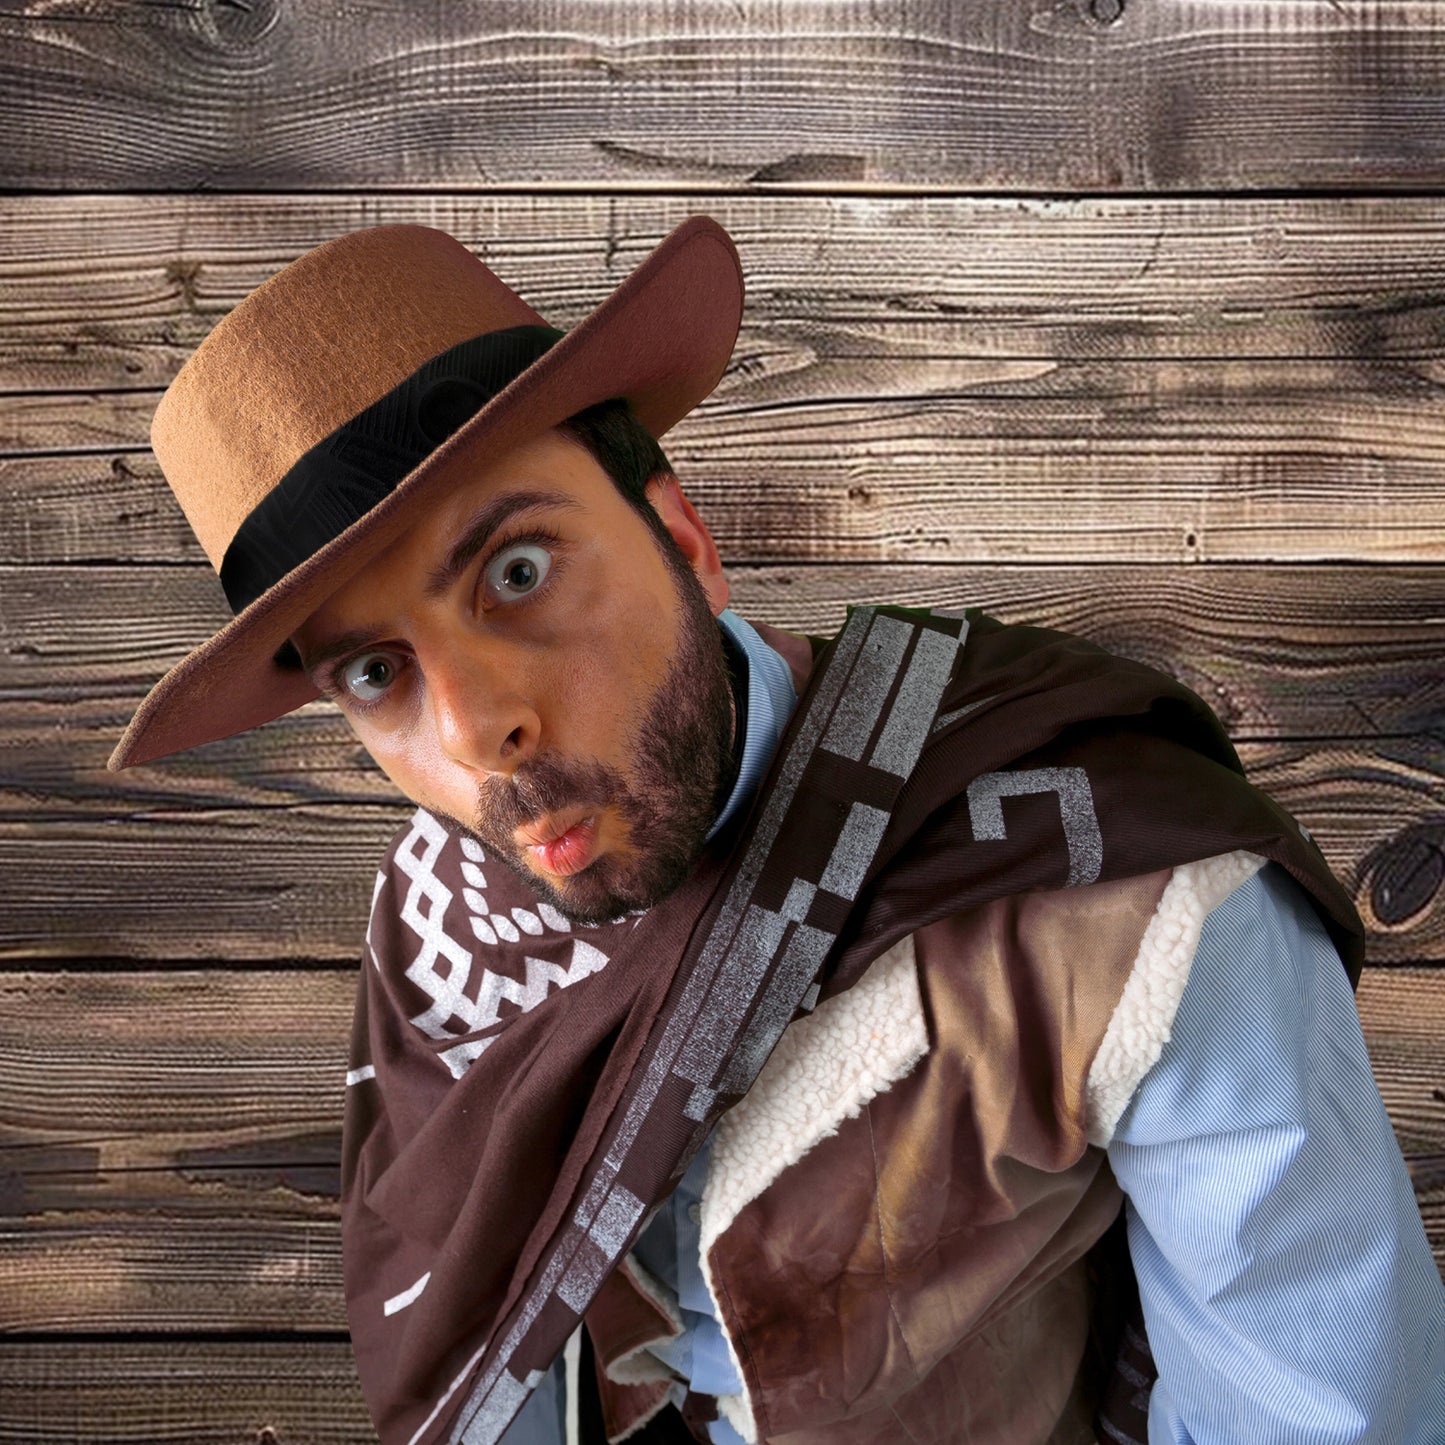 A person dressed in Western attire, wearing a brown hat and a poncho, stands in front of an ideasbackdrop 7x5ft Vintage Wood Backdrop Retro Rustic Wooden Floor Background for Photography Photo Booth Video Shoot Studio Props, making an exaggerated surprised facial expression.